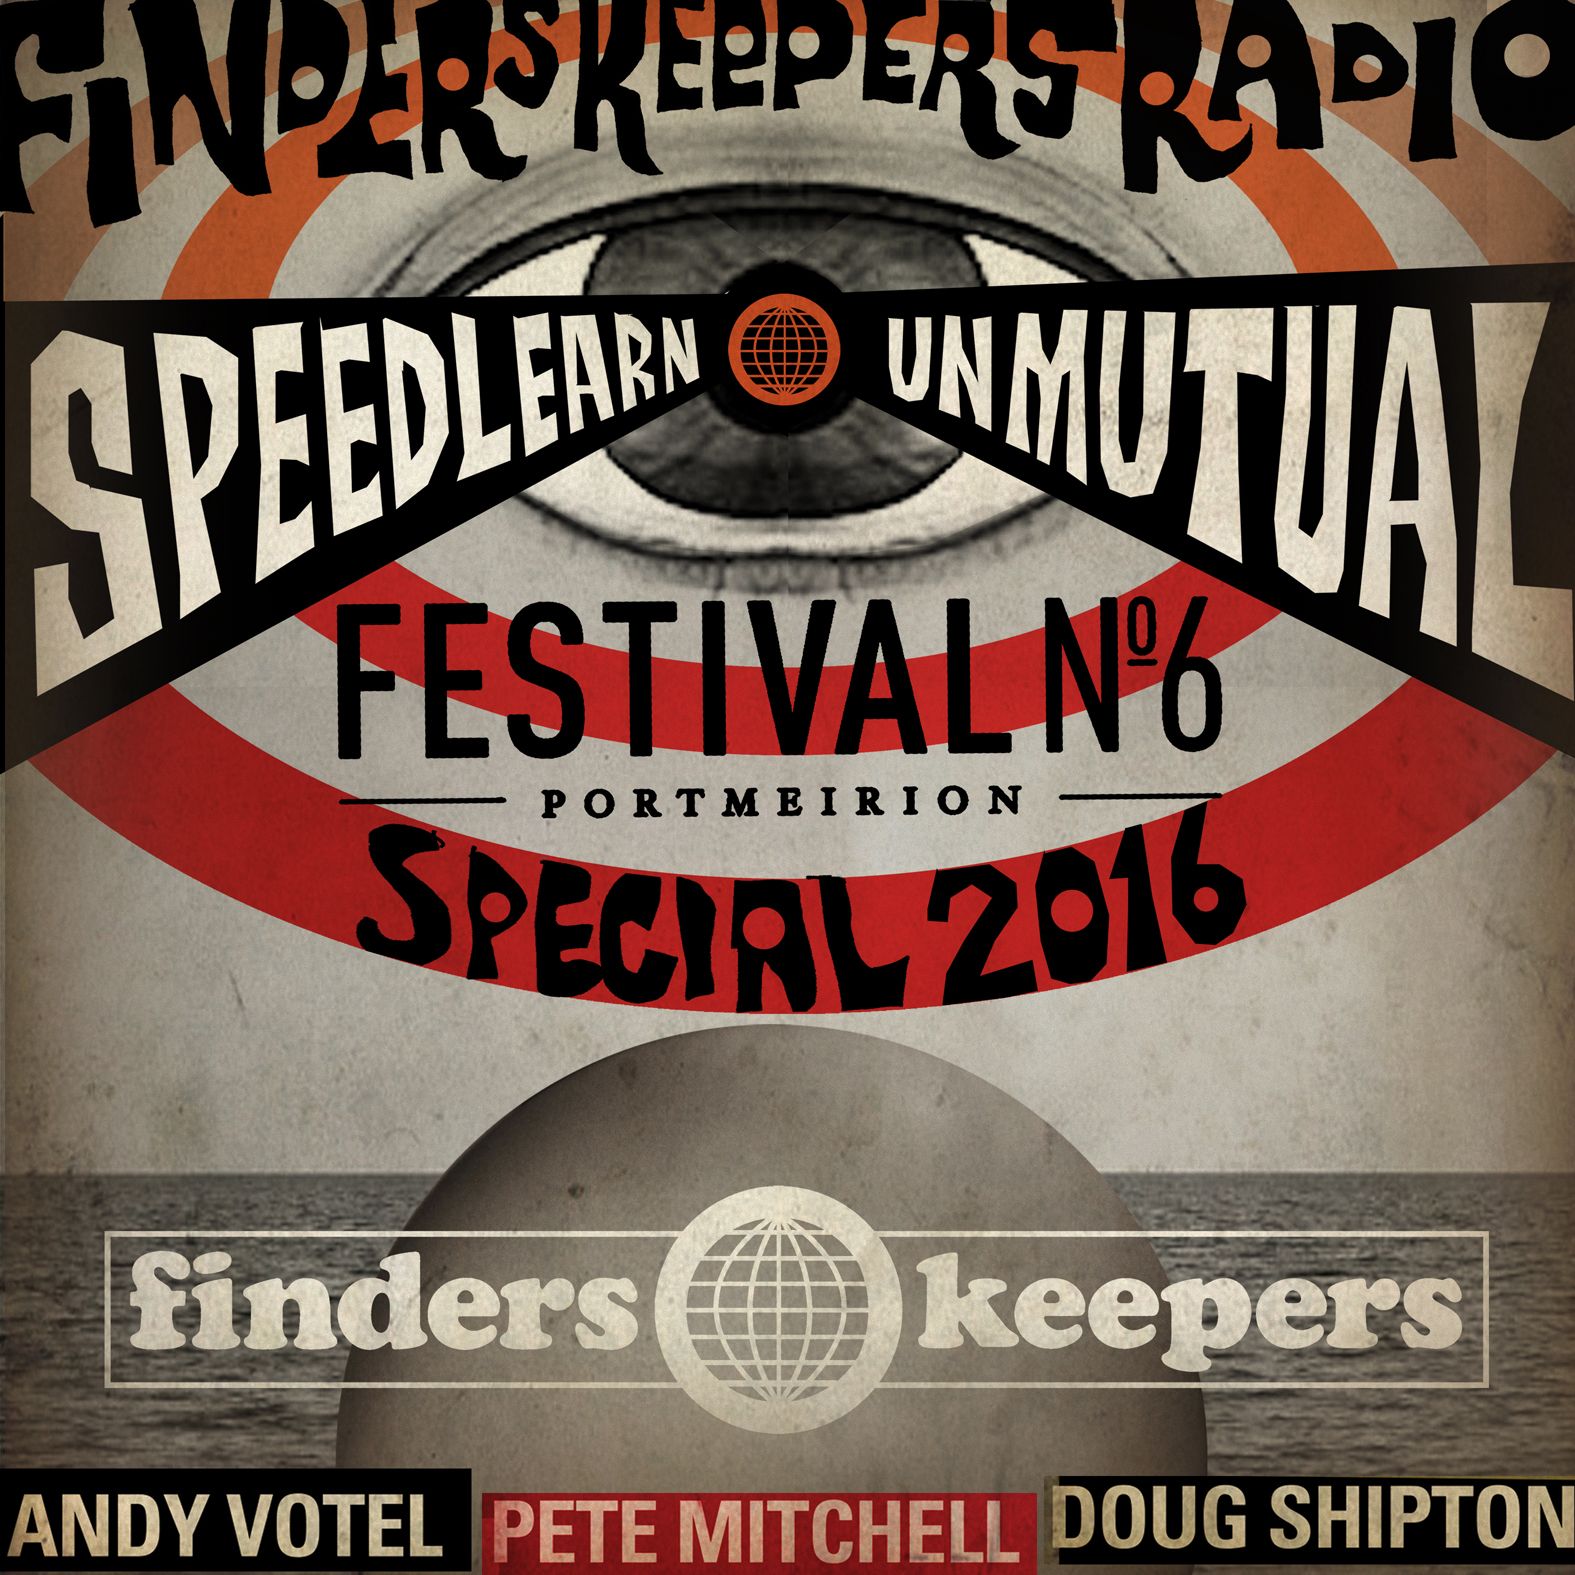 Finders Keepers Radio - Festival No 6 Tour Guide - Finders Keepers ...